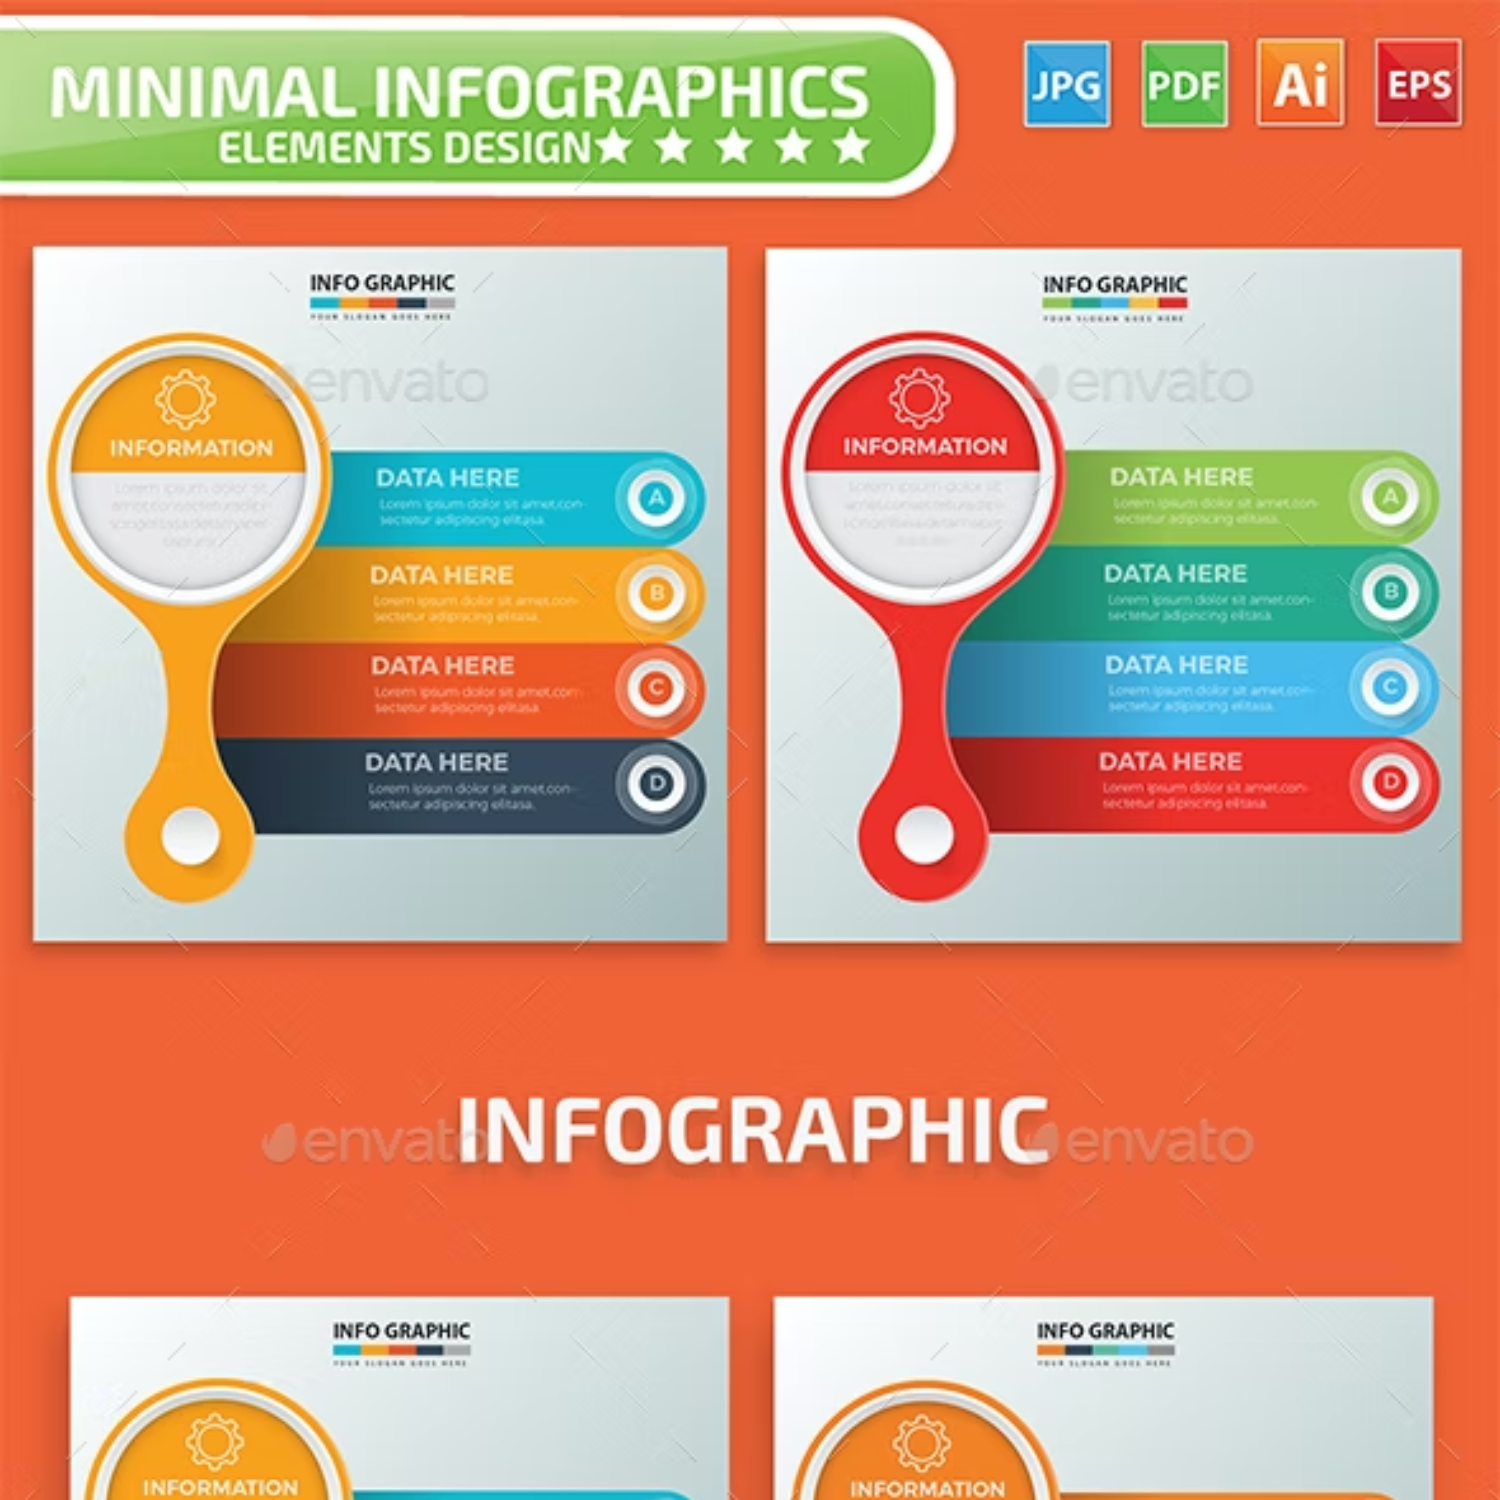 Infographic Design Main Cover.